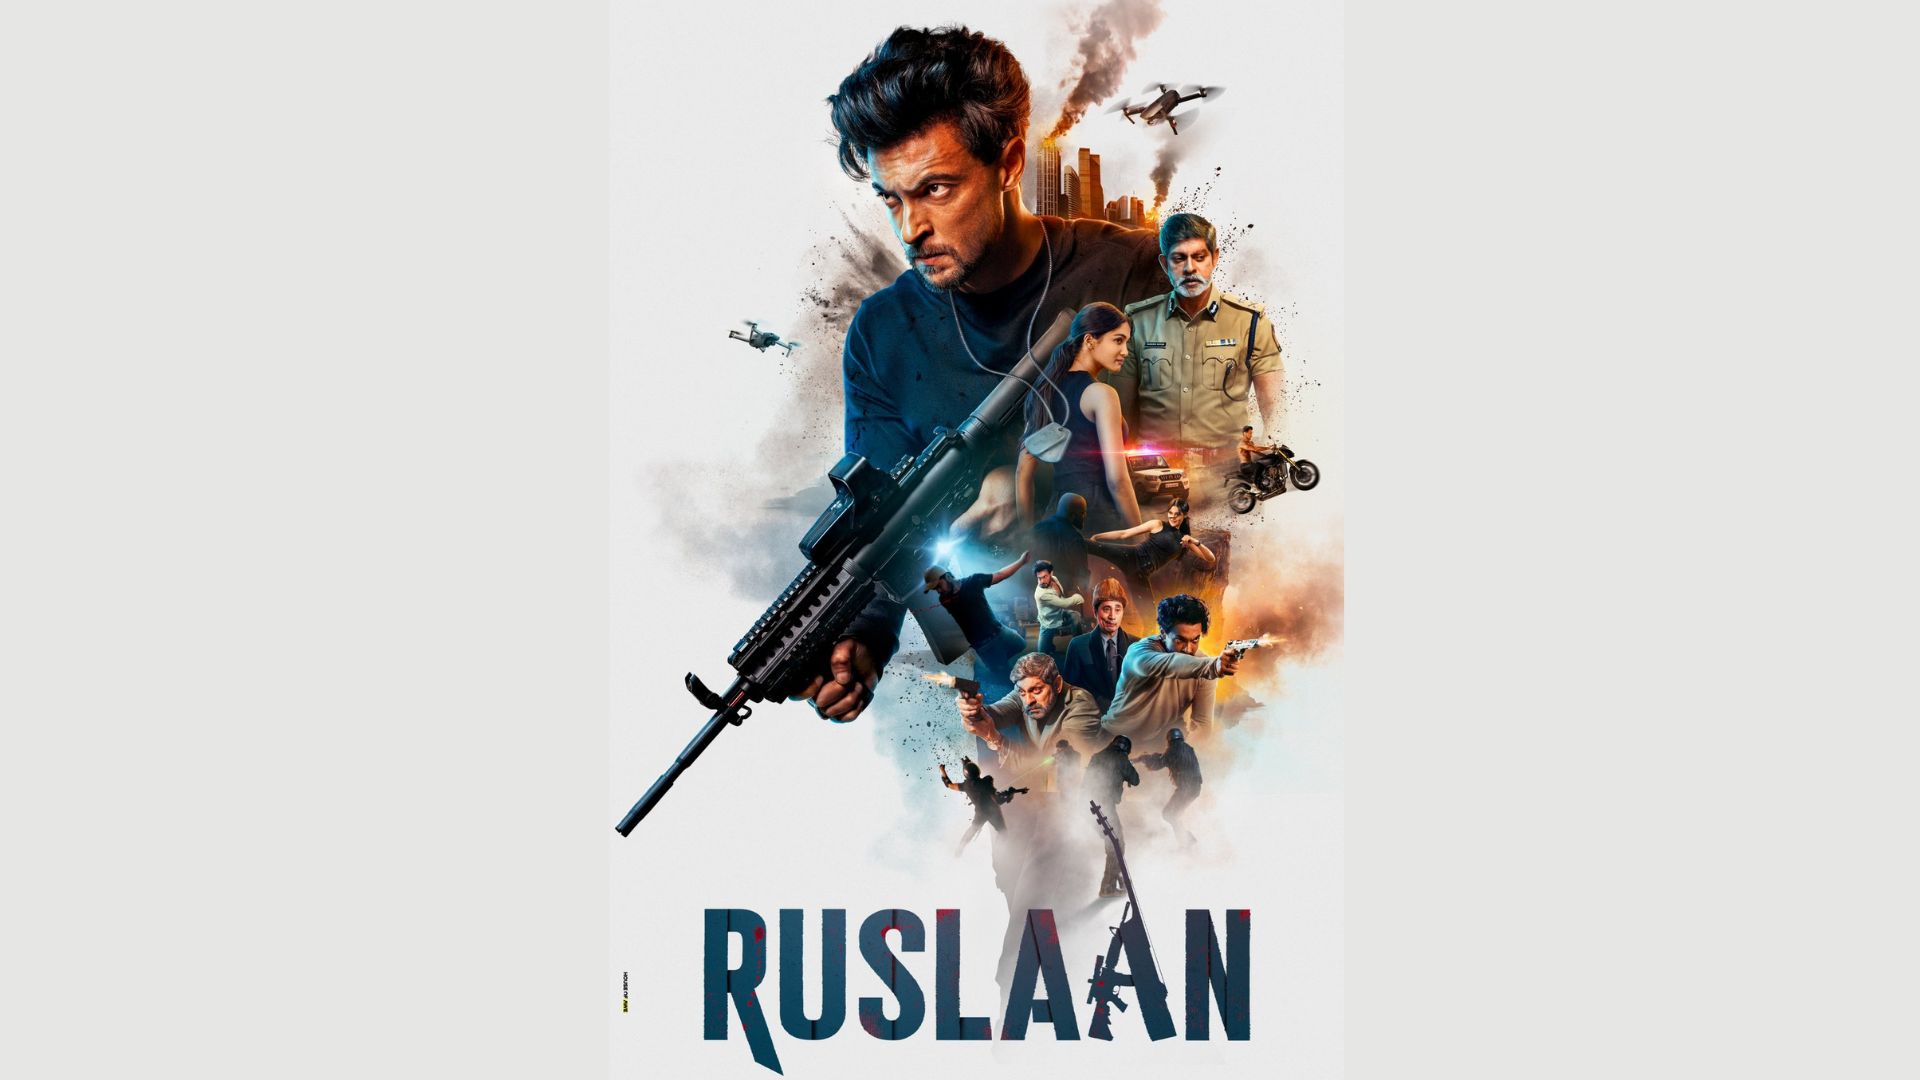 You can now watch the newly released trailer for Ruslaan